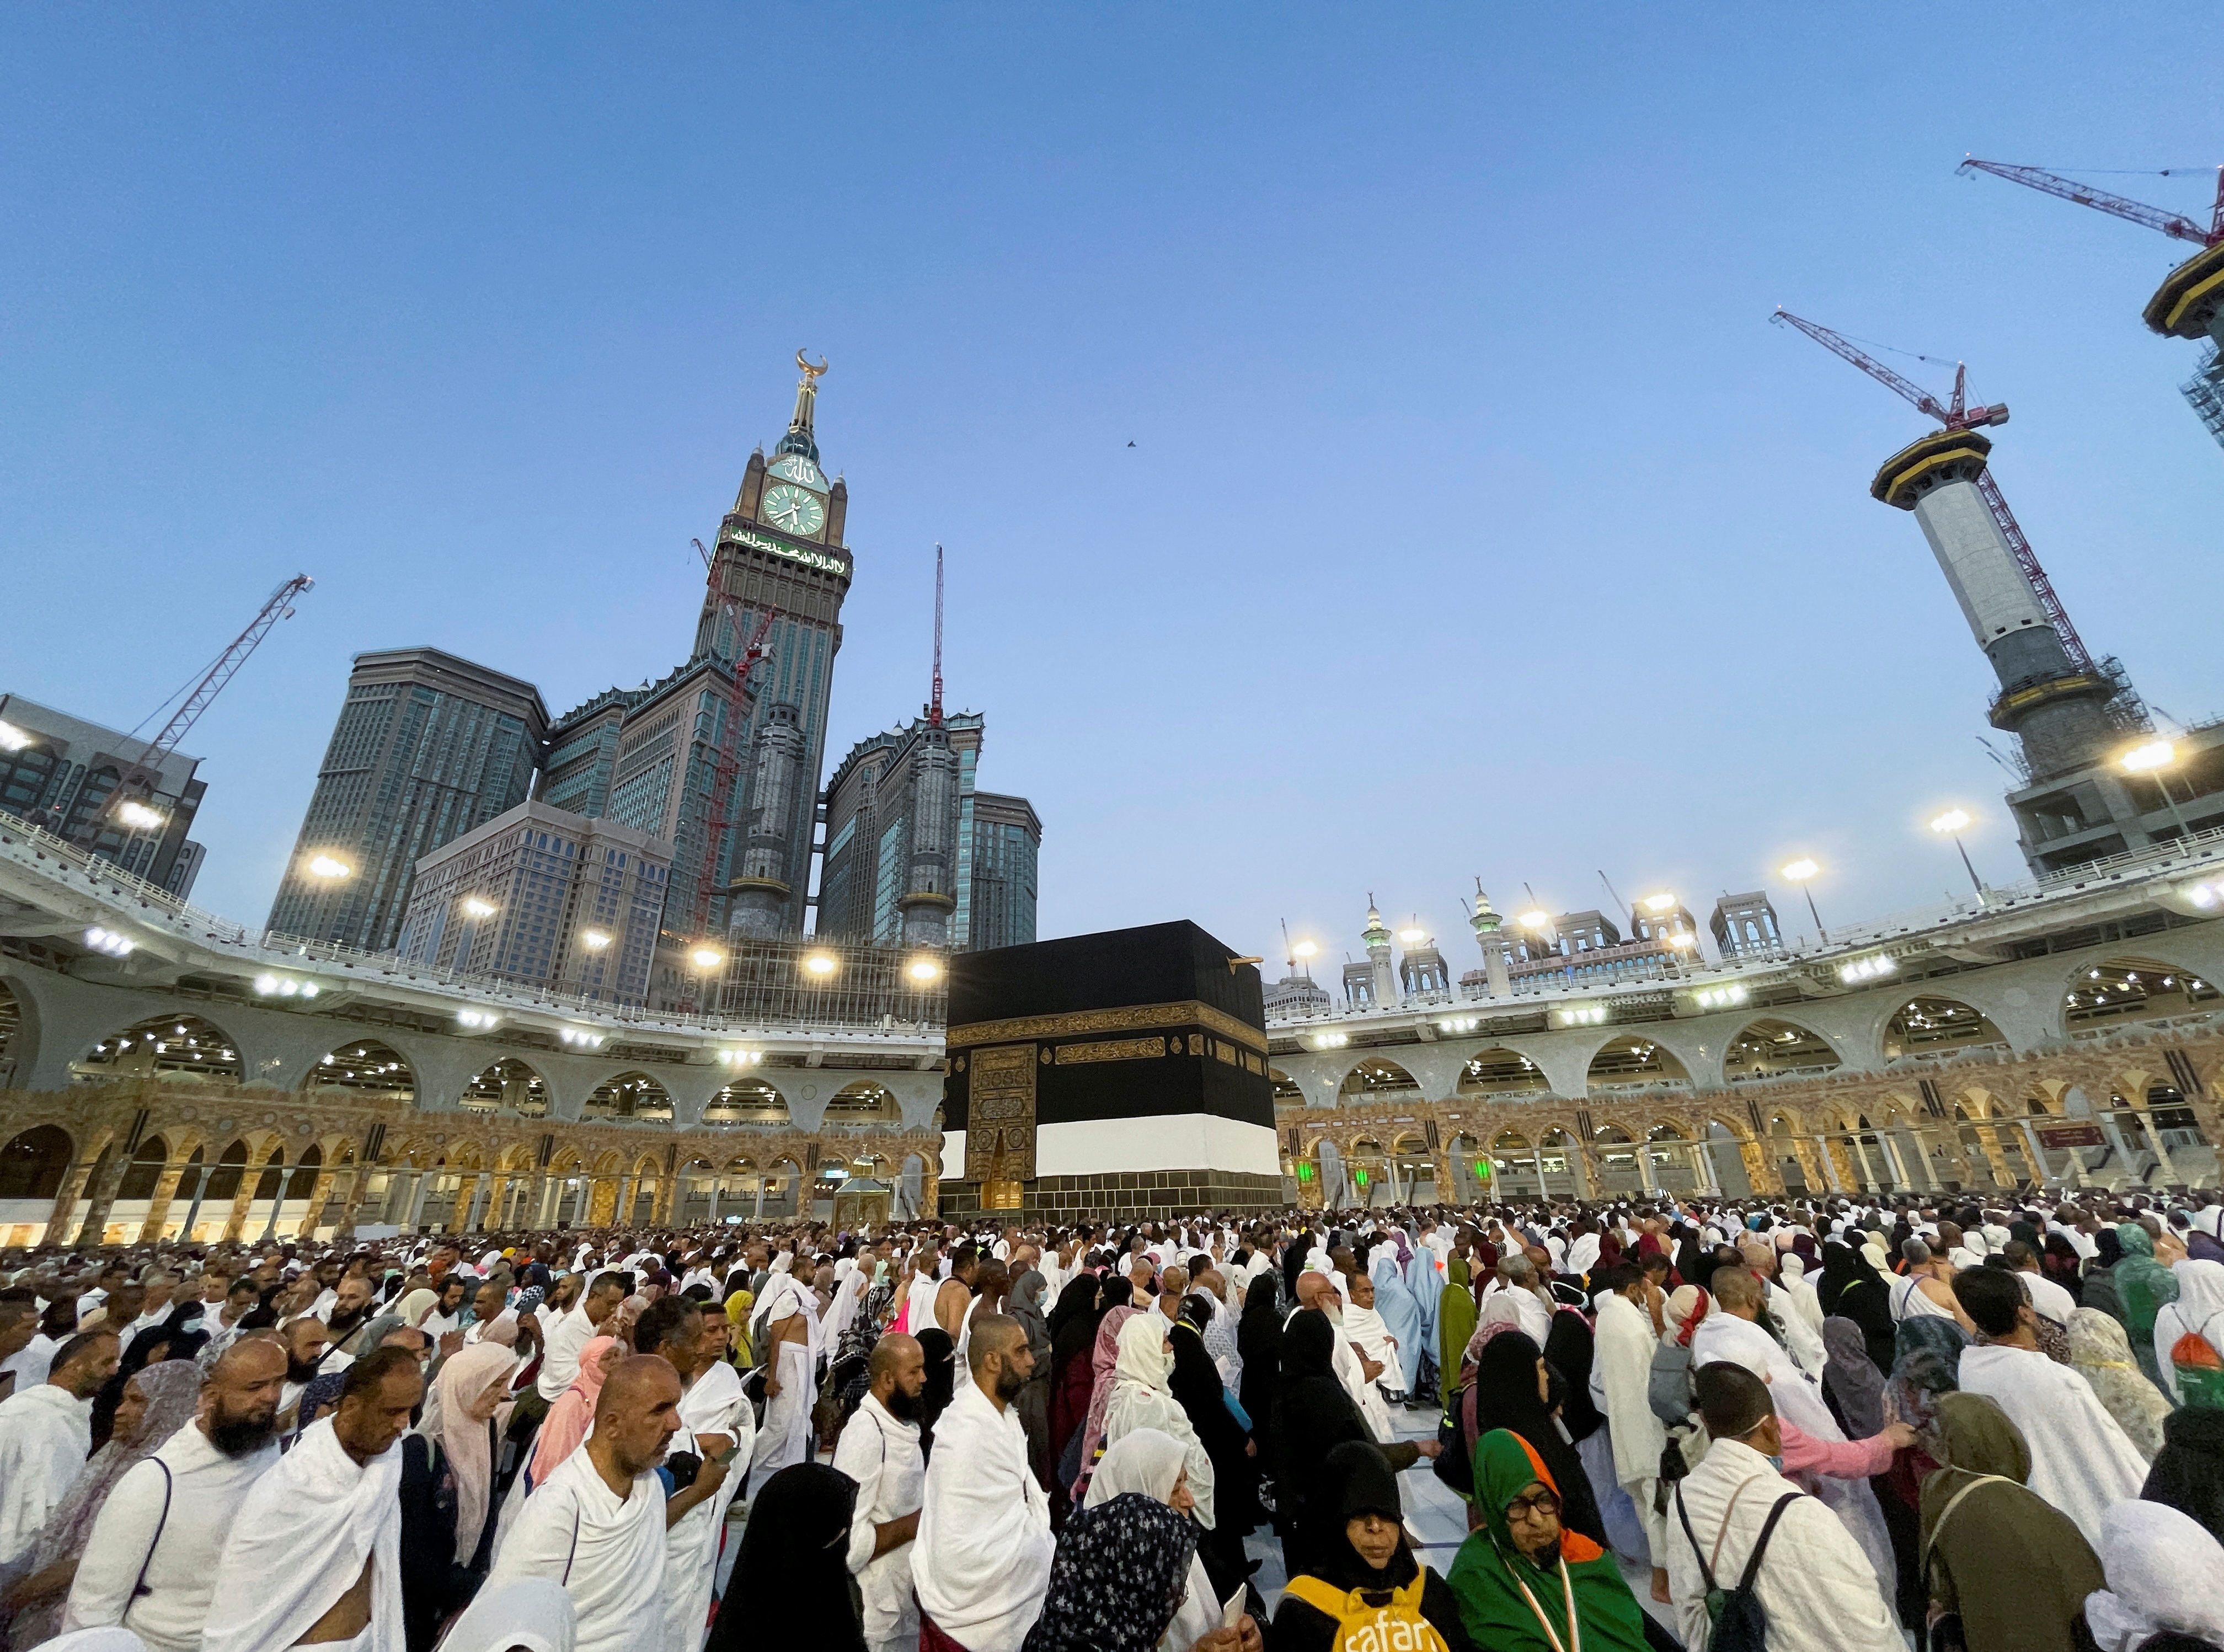 Muslim pilgrims circle the Kaaba and pray at the Grand mosque in the holy city of Mecca, Saudi Arabia